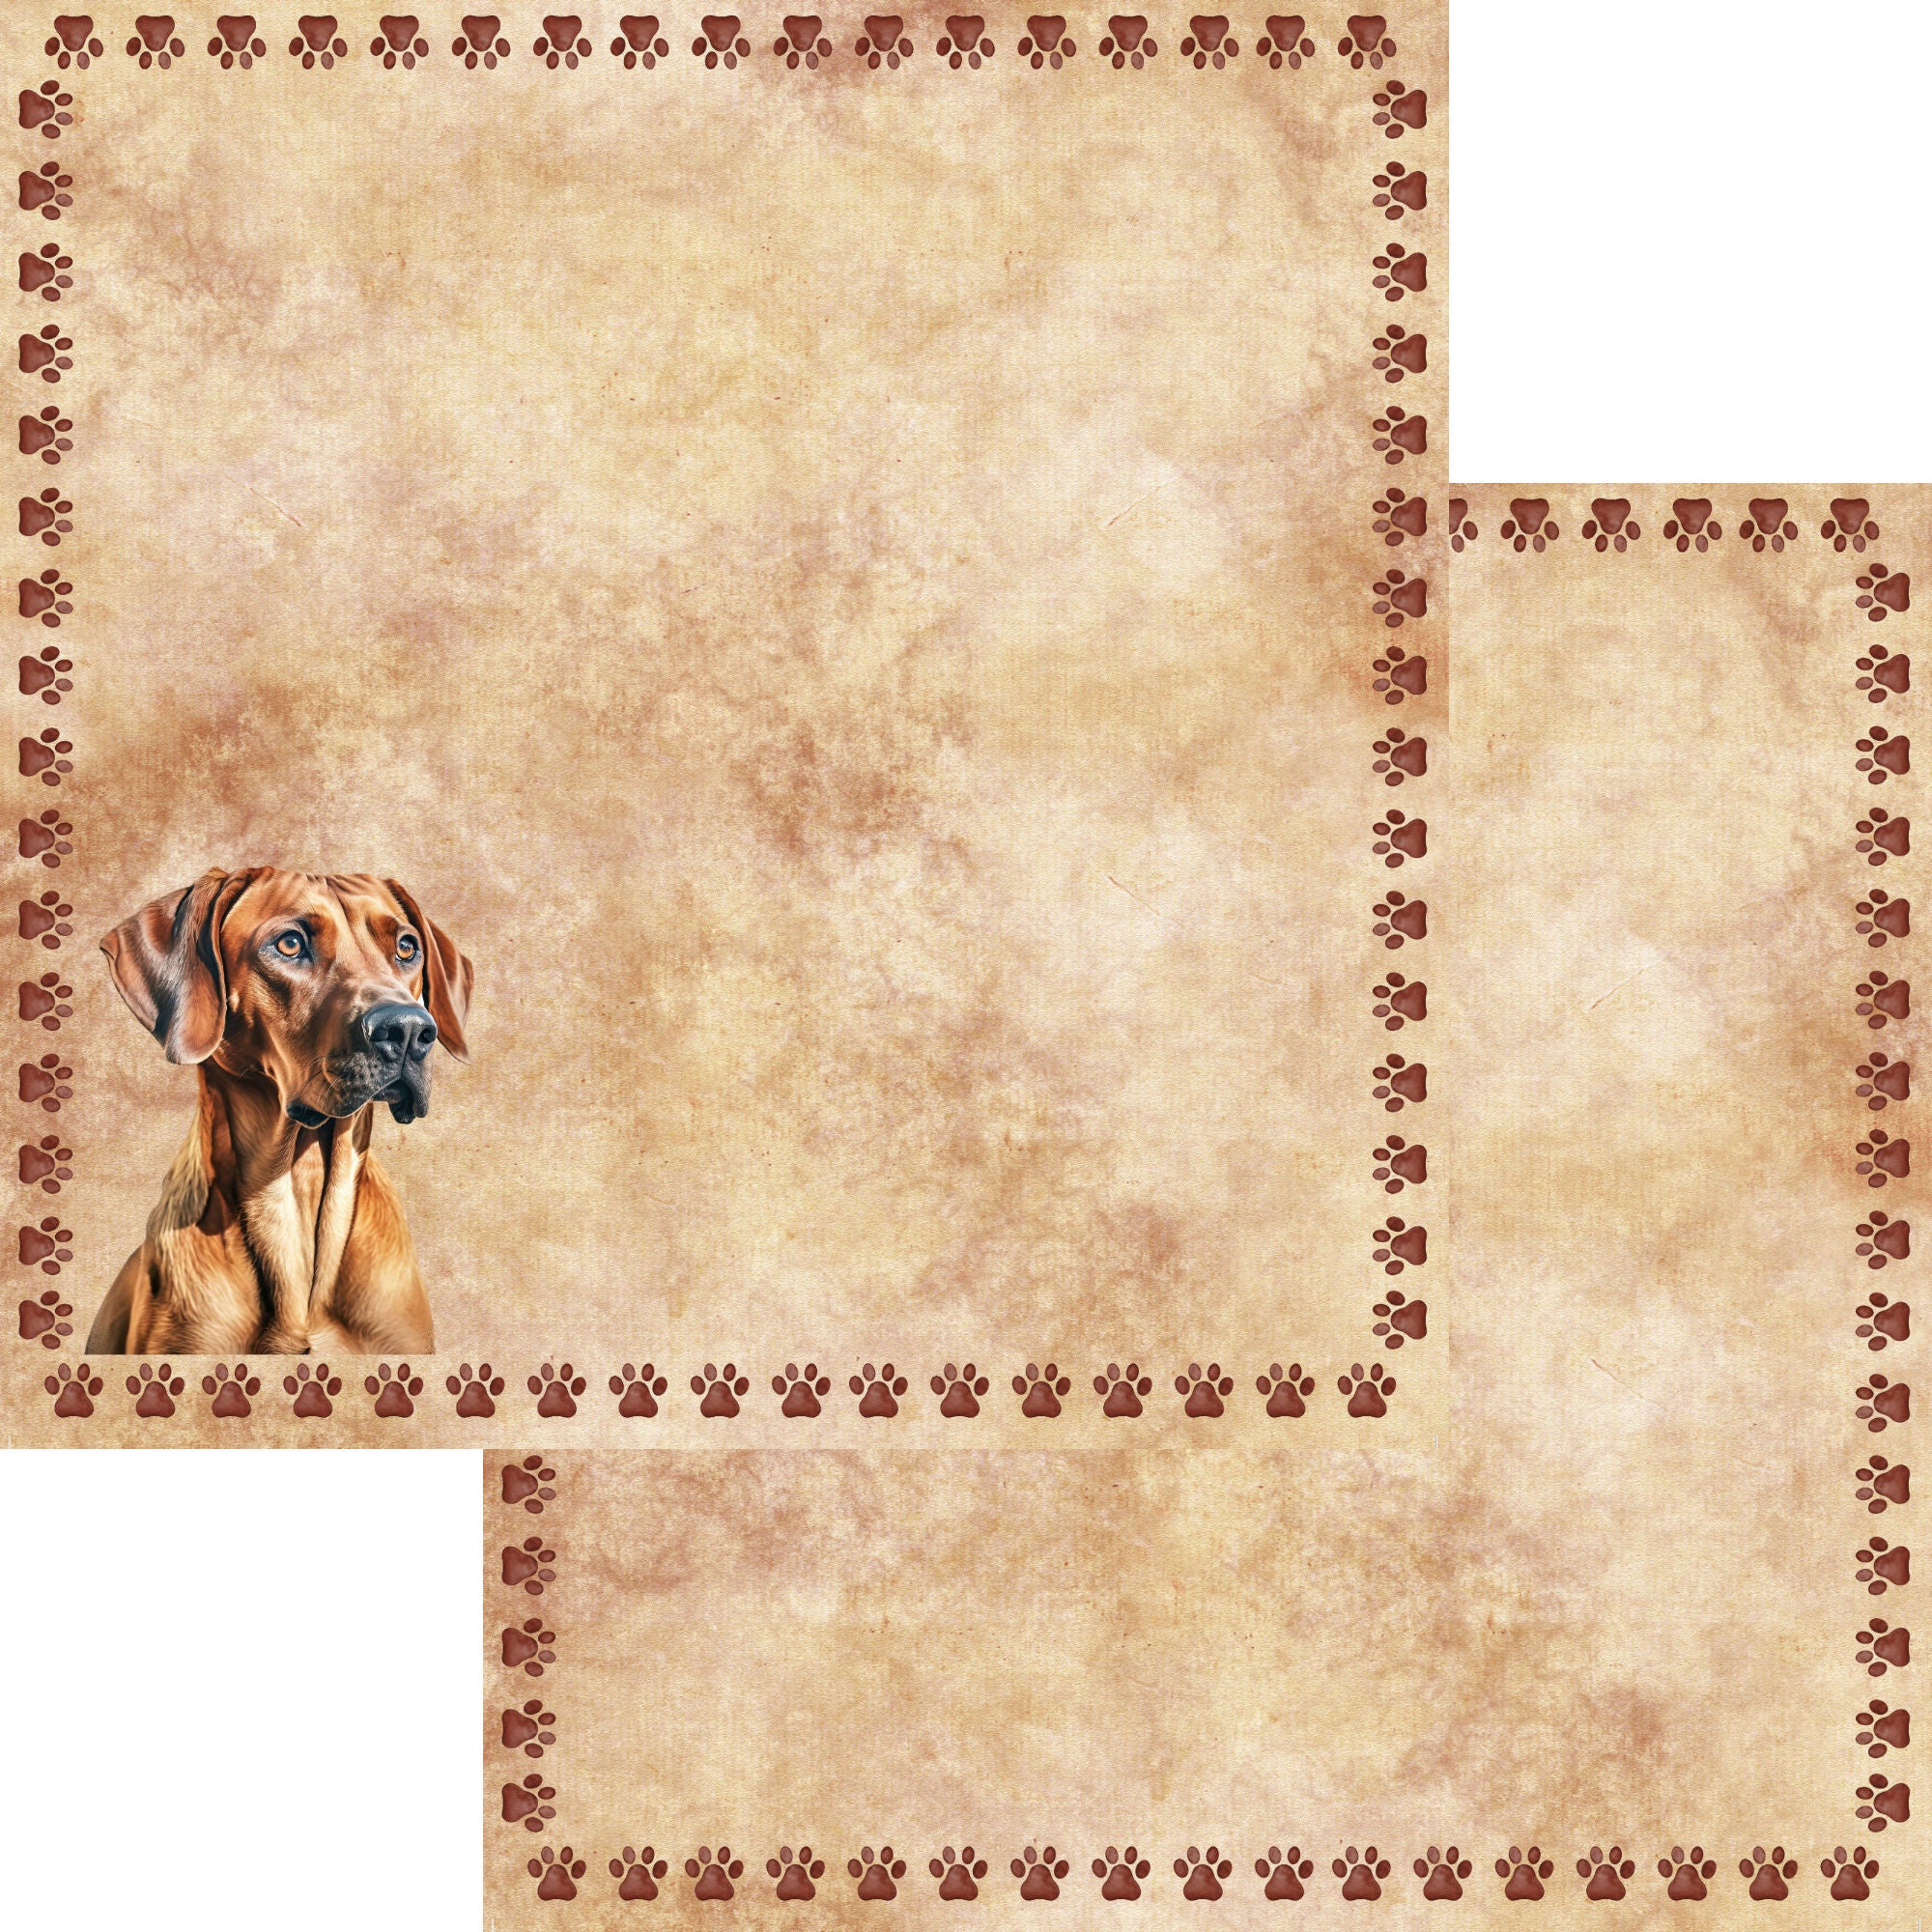 Dog Breeds Collection Rhodesian Ridgeback 12 x 12 Double-Sided Scrapbook Paper by SSC Designs